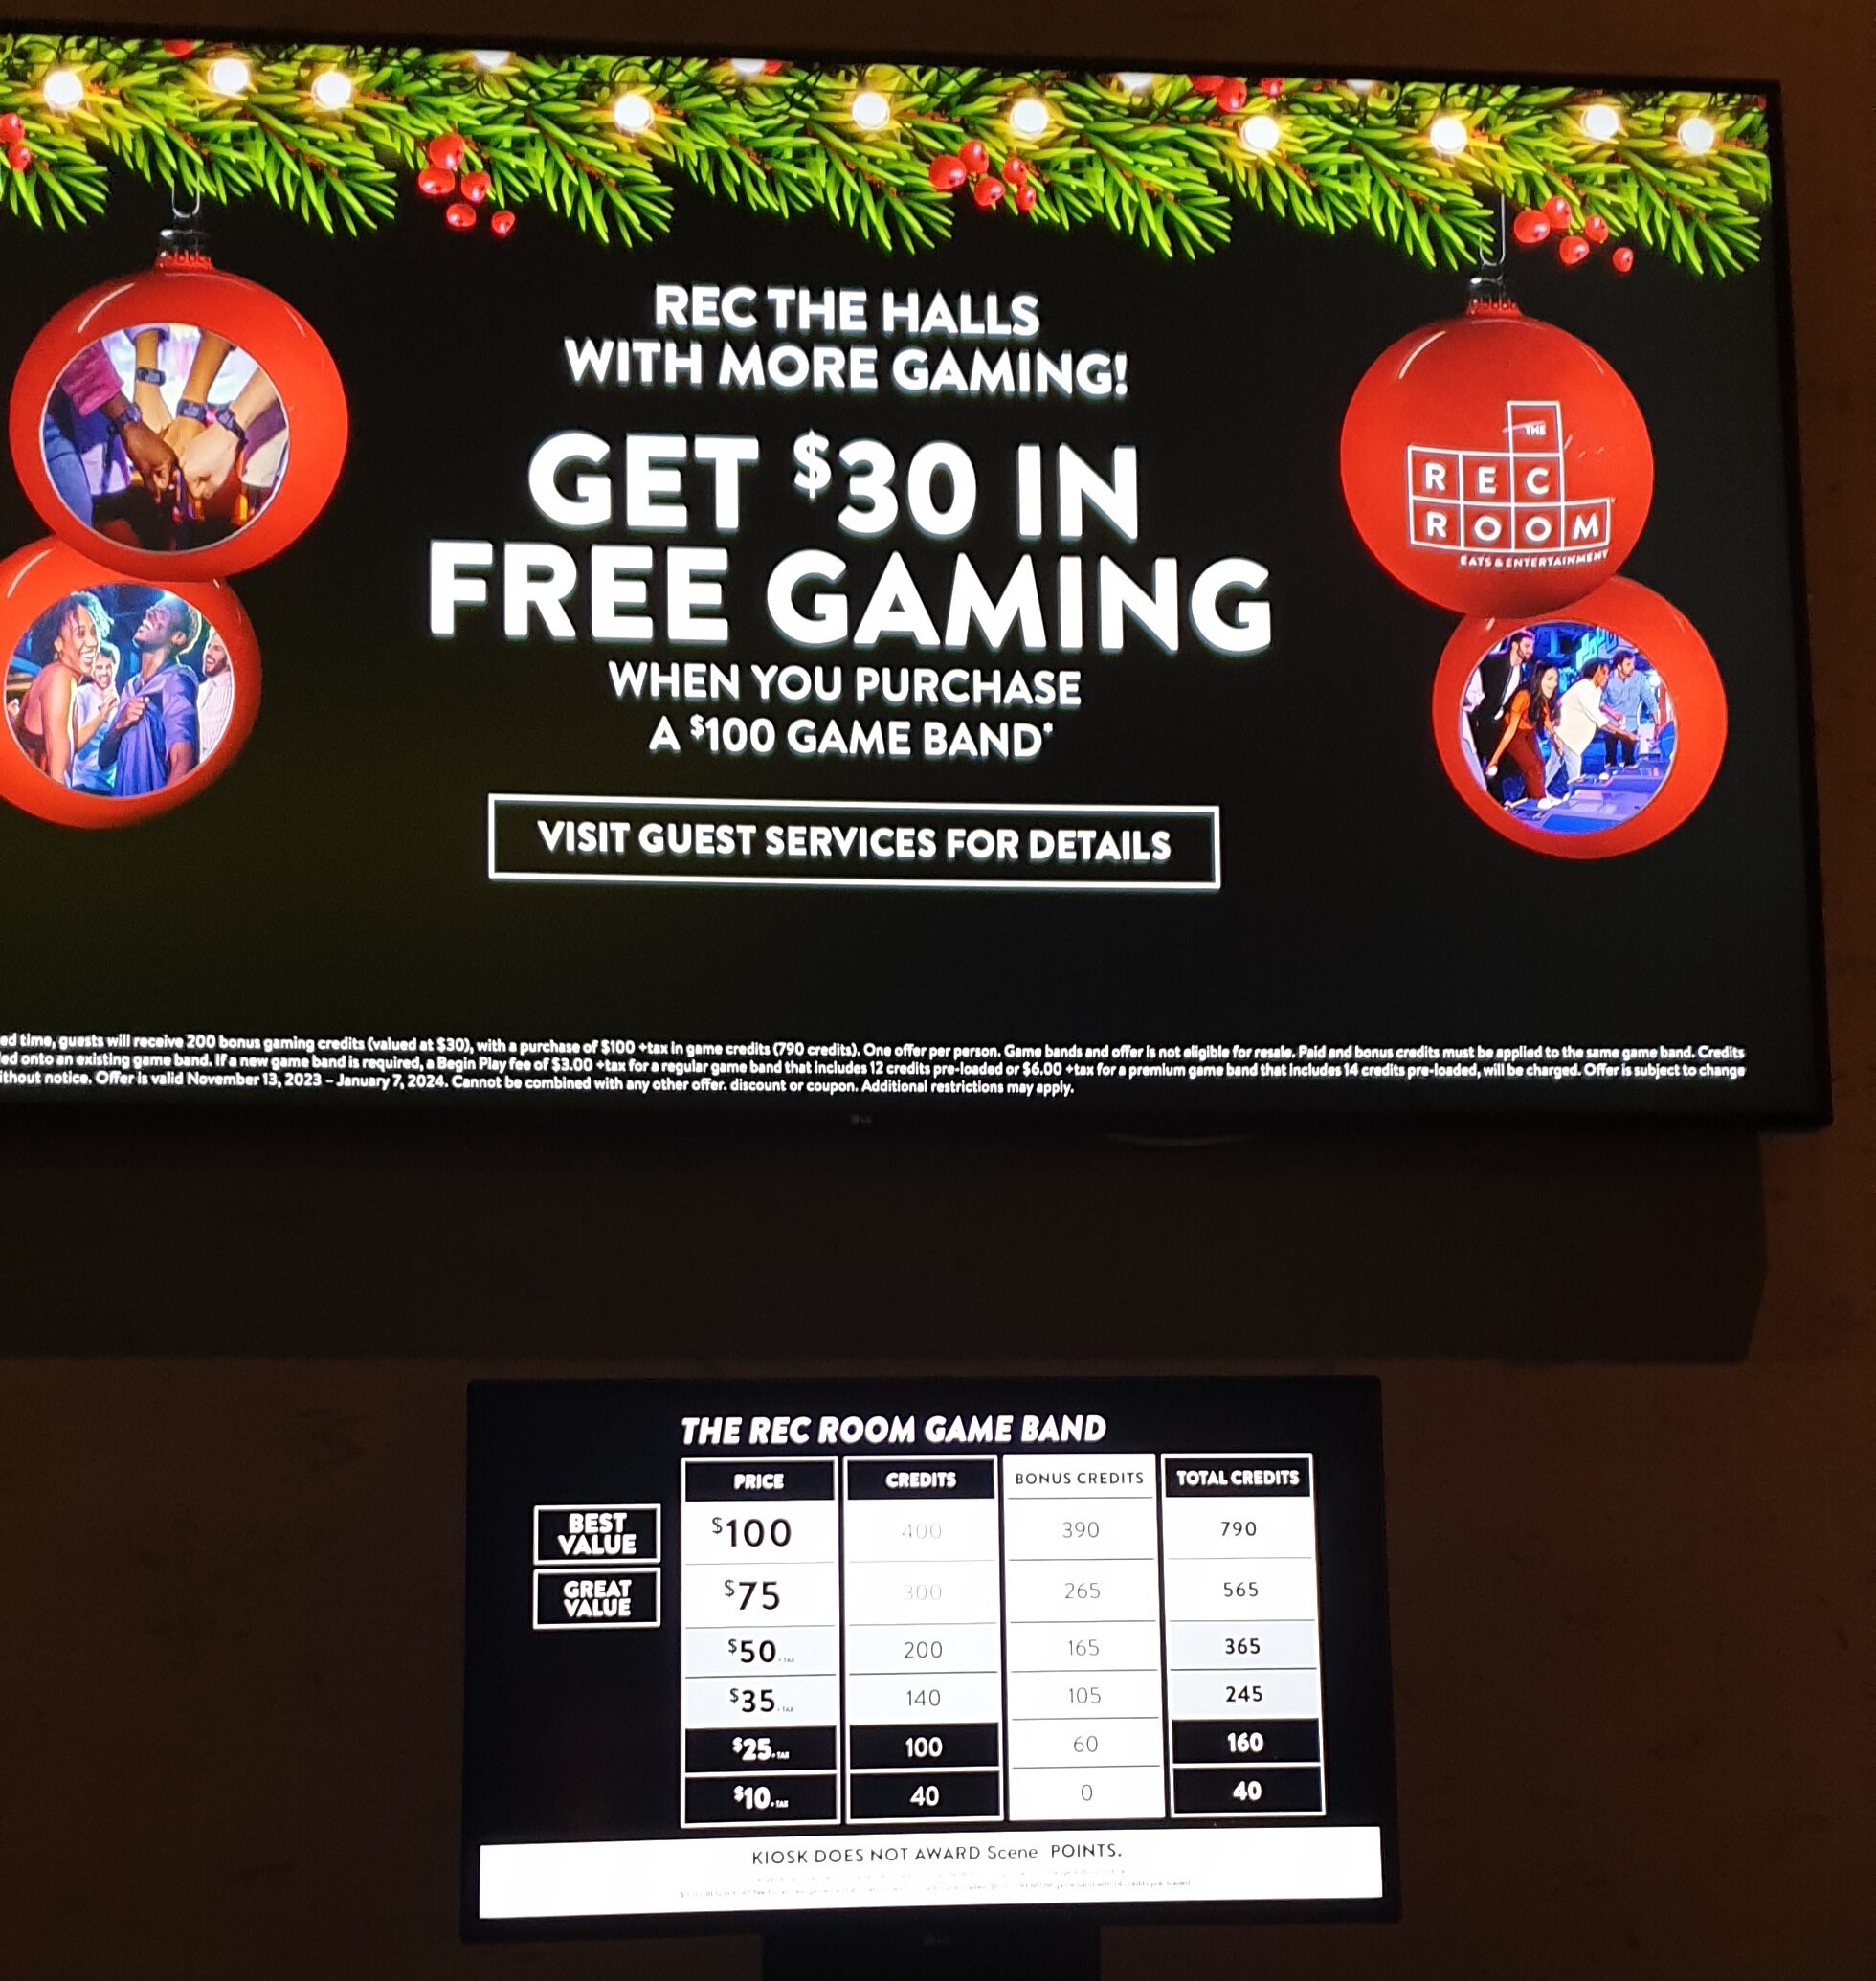 The Rec Room] Free Cineplex Movie Ticket w/ purchase of $40+ The Rec Room  e-Gift Card (also redeemable at Cineplex) - RedFlagDeals.com Forums